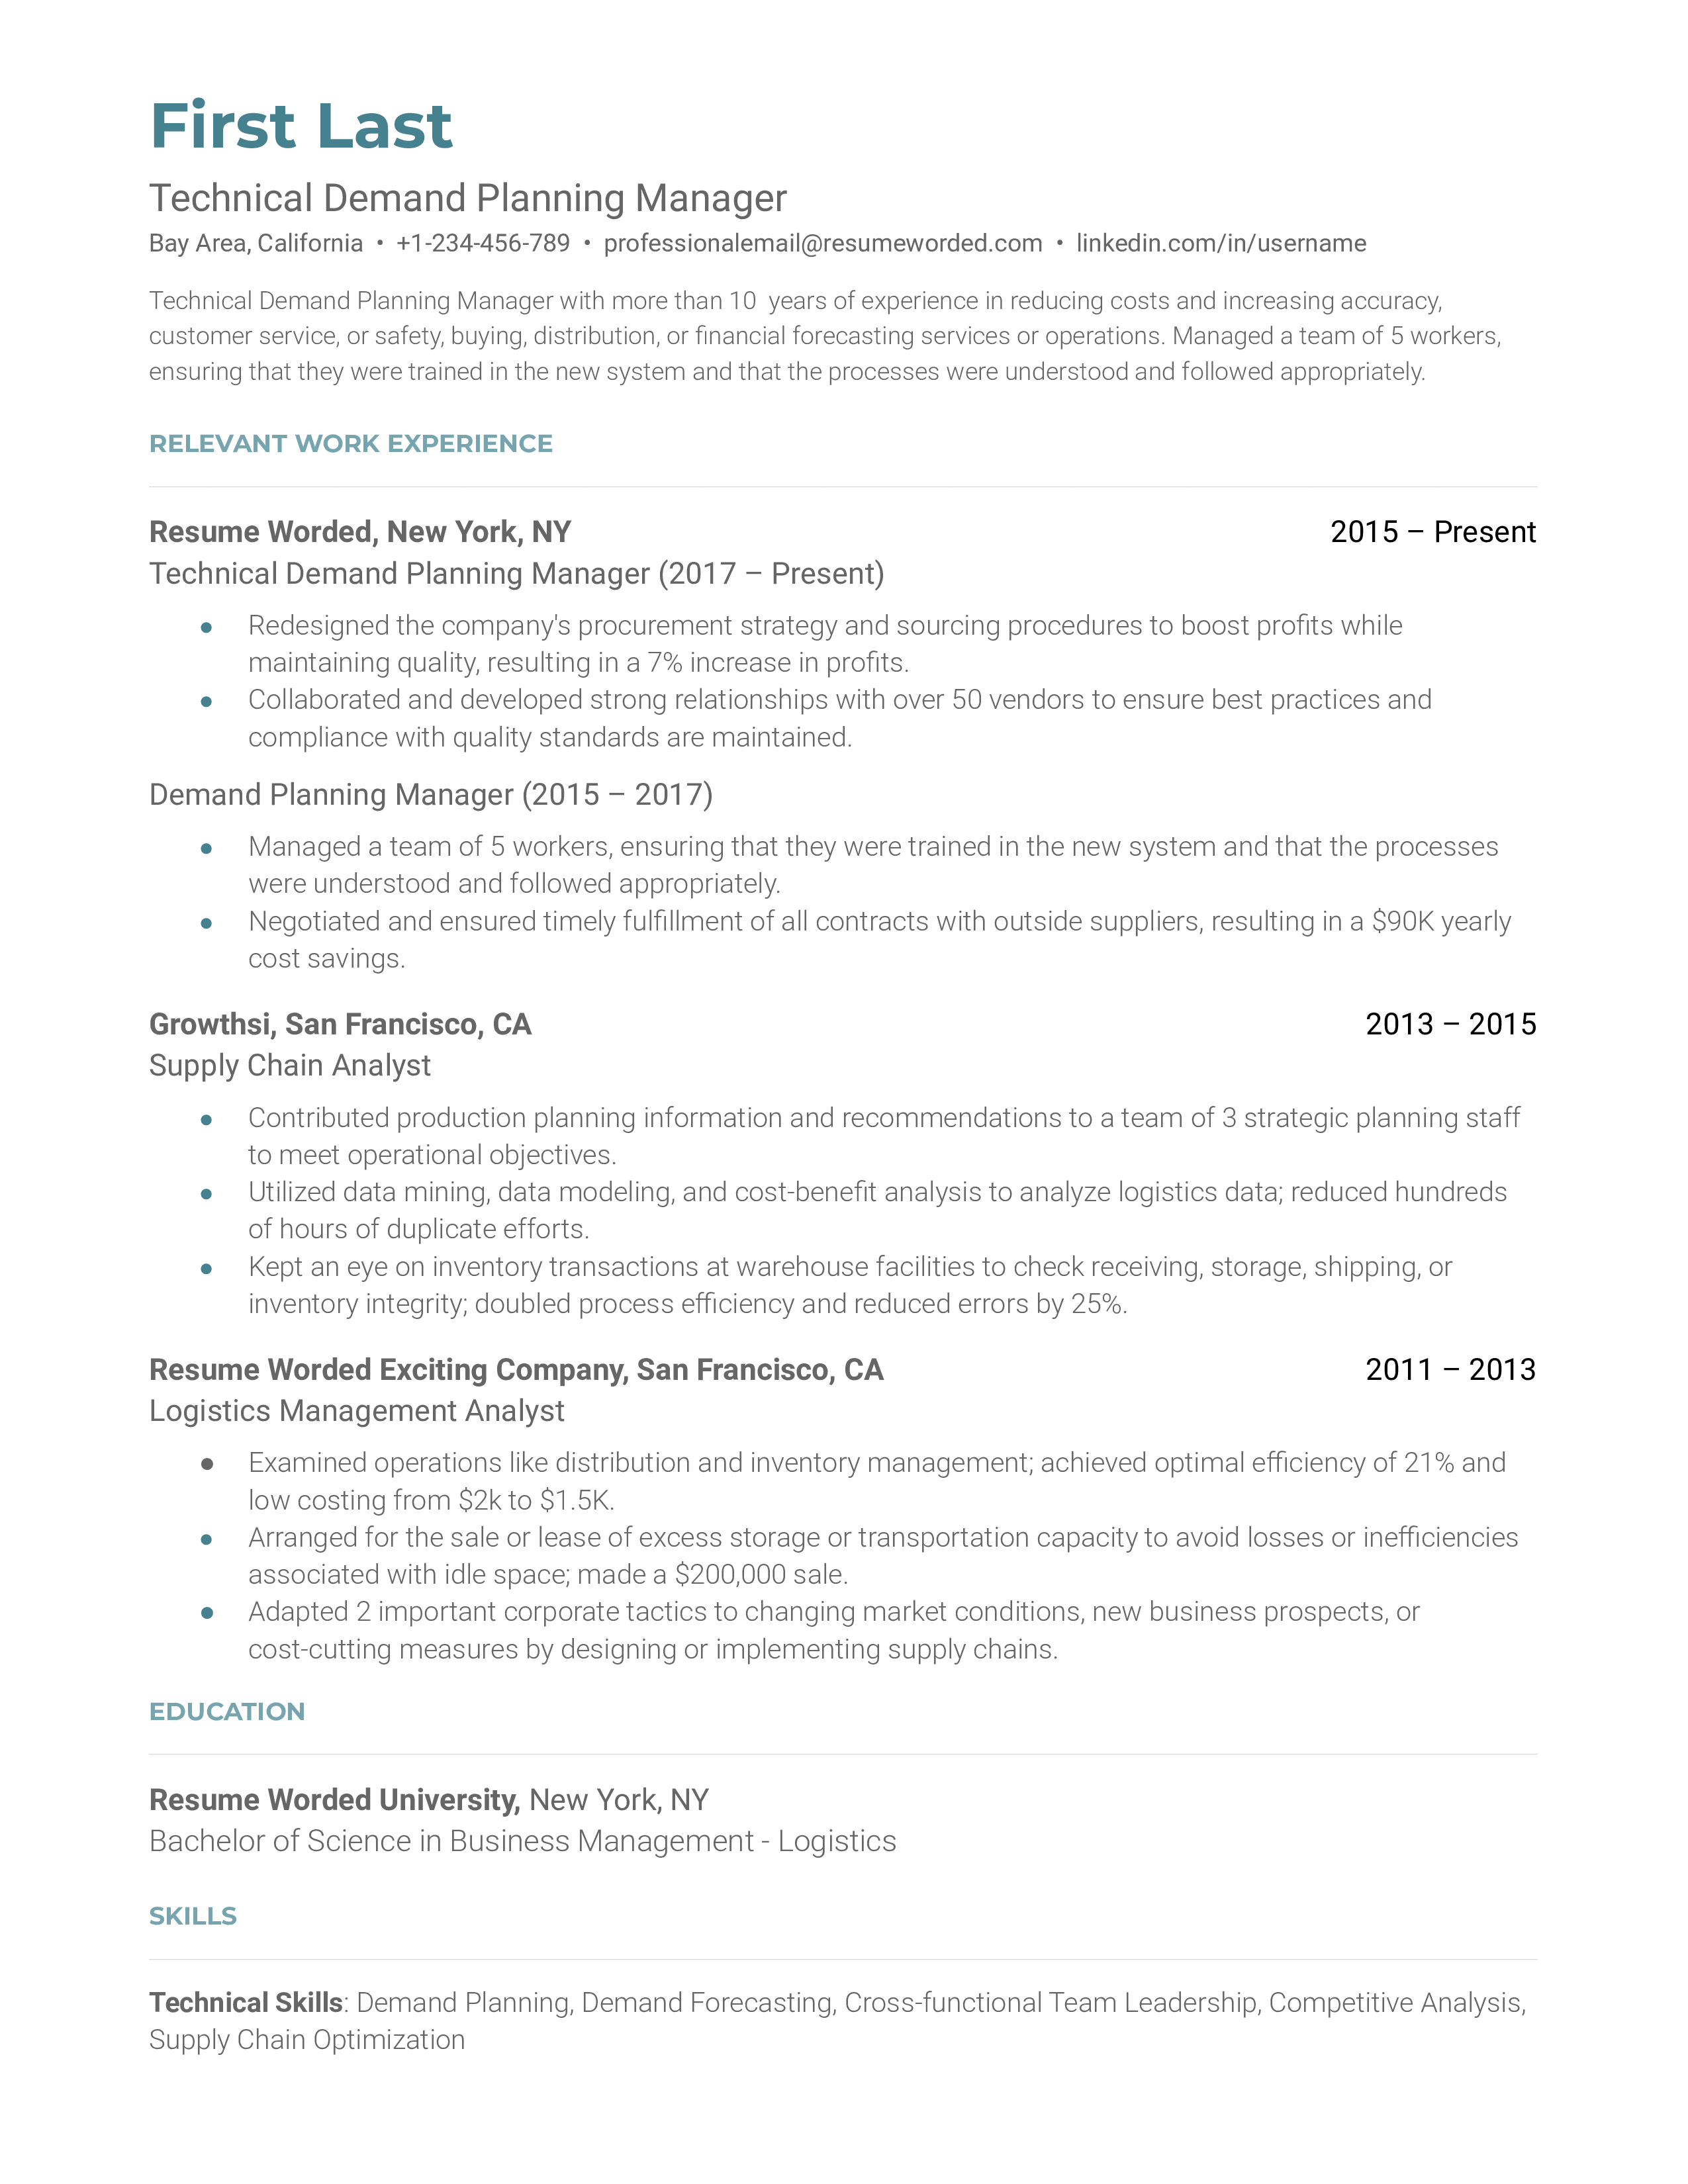 Technical Demand Planning Manager Resume Template + Example